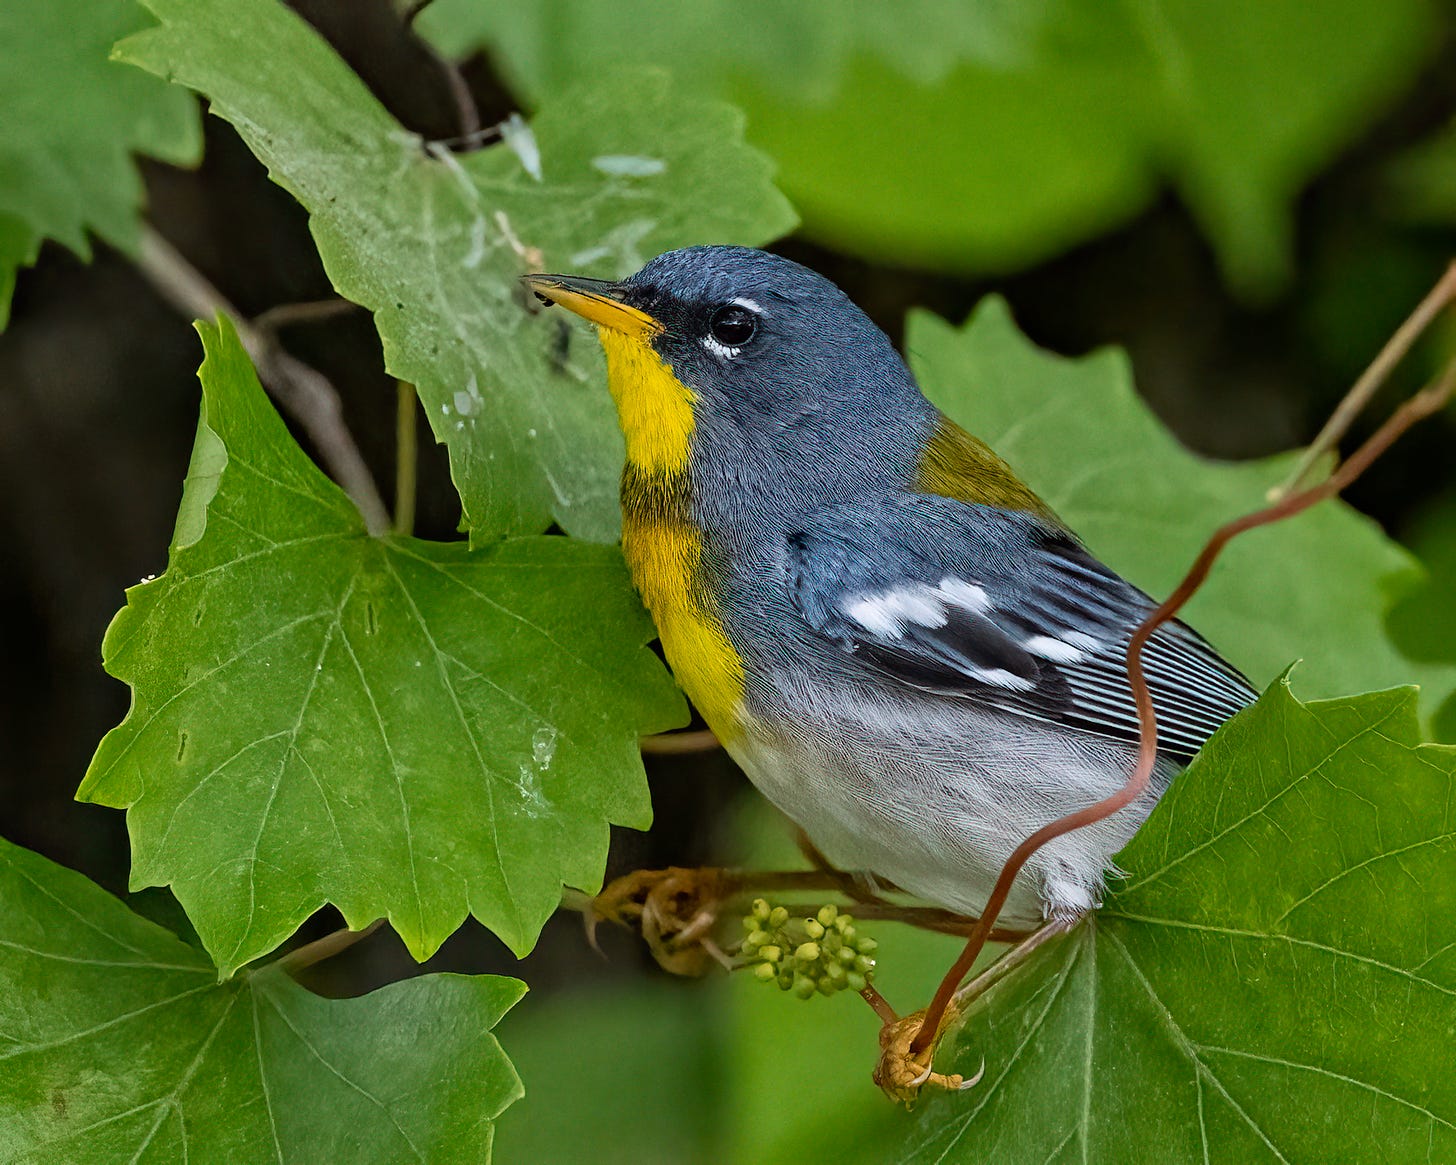 A northern parula warbler perches in a leafy tree. He is mostly blue with a yellowish green patch on his back, a yellow throat and chest, and a yellow lower beak.